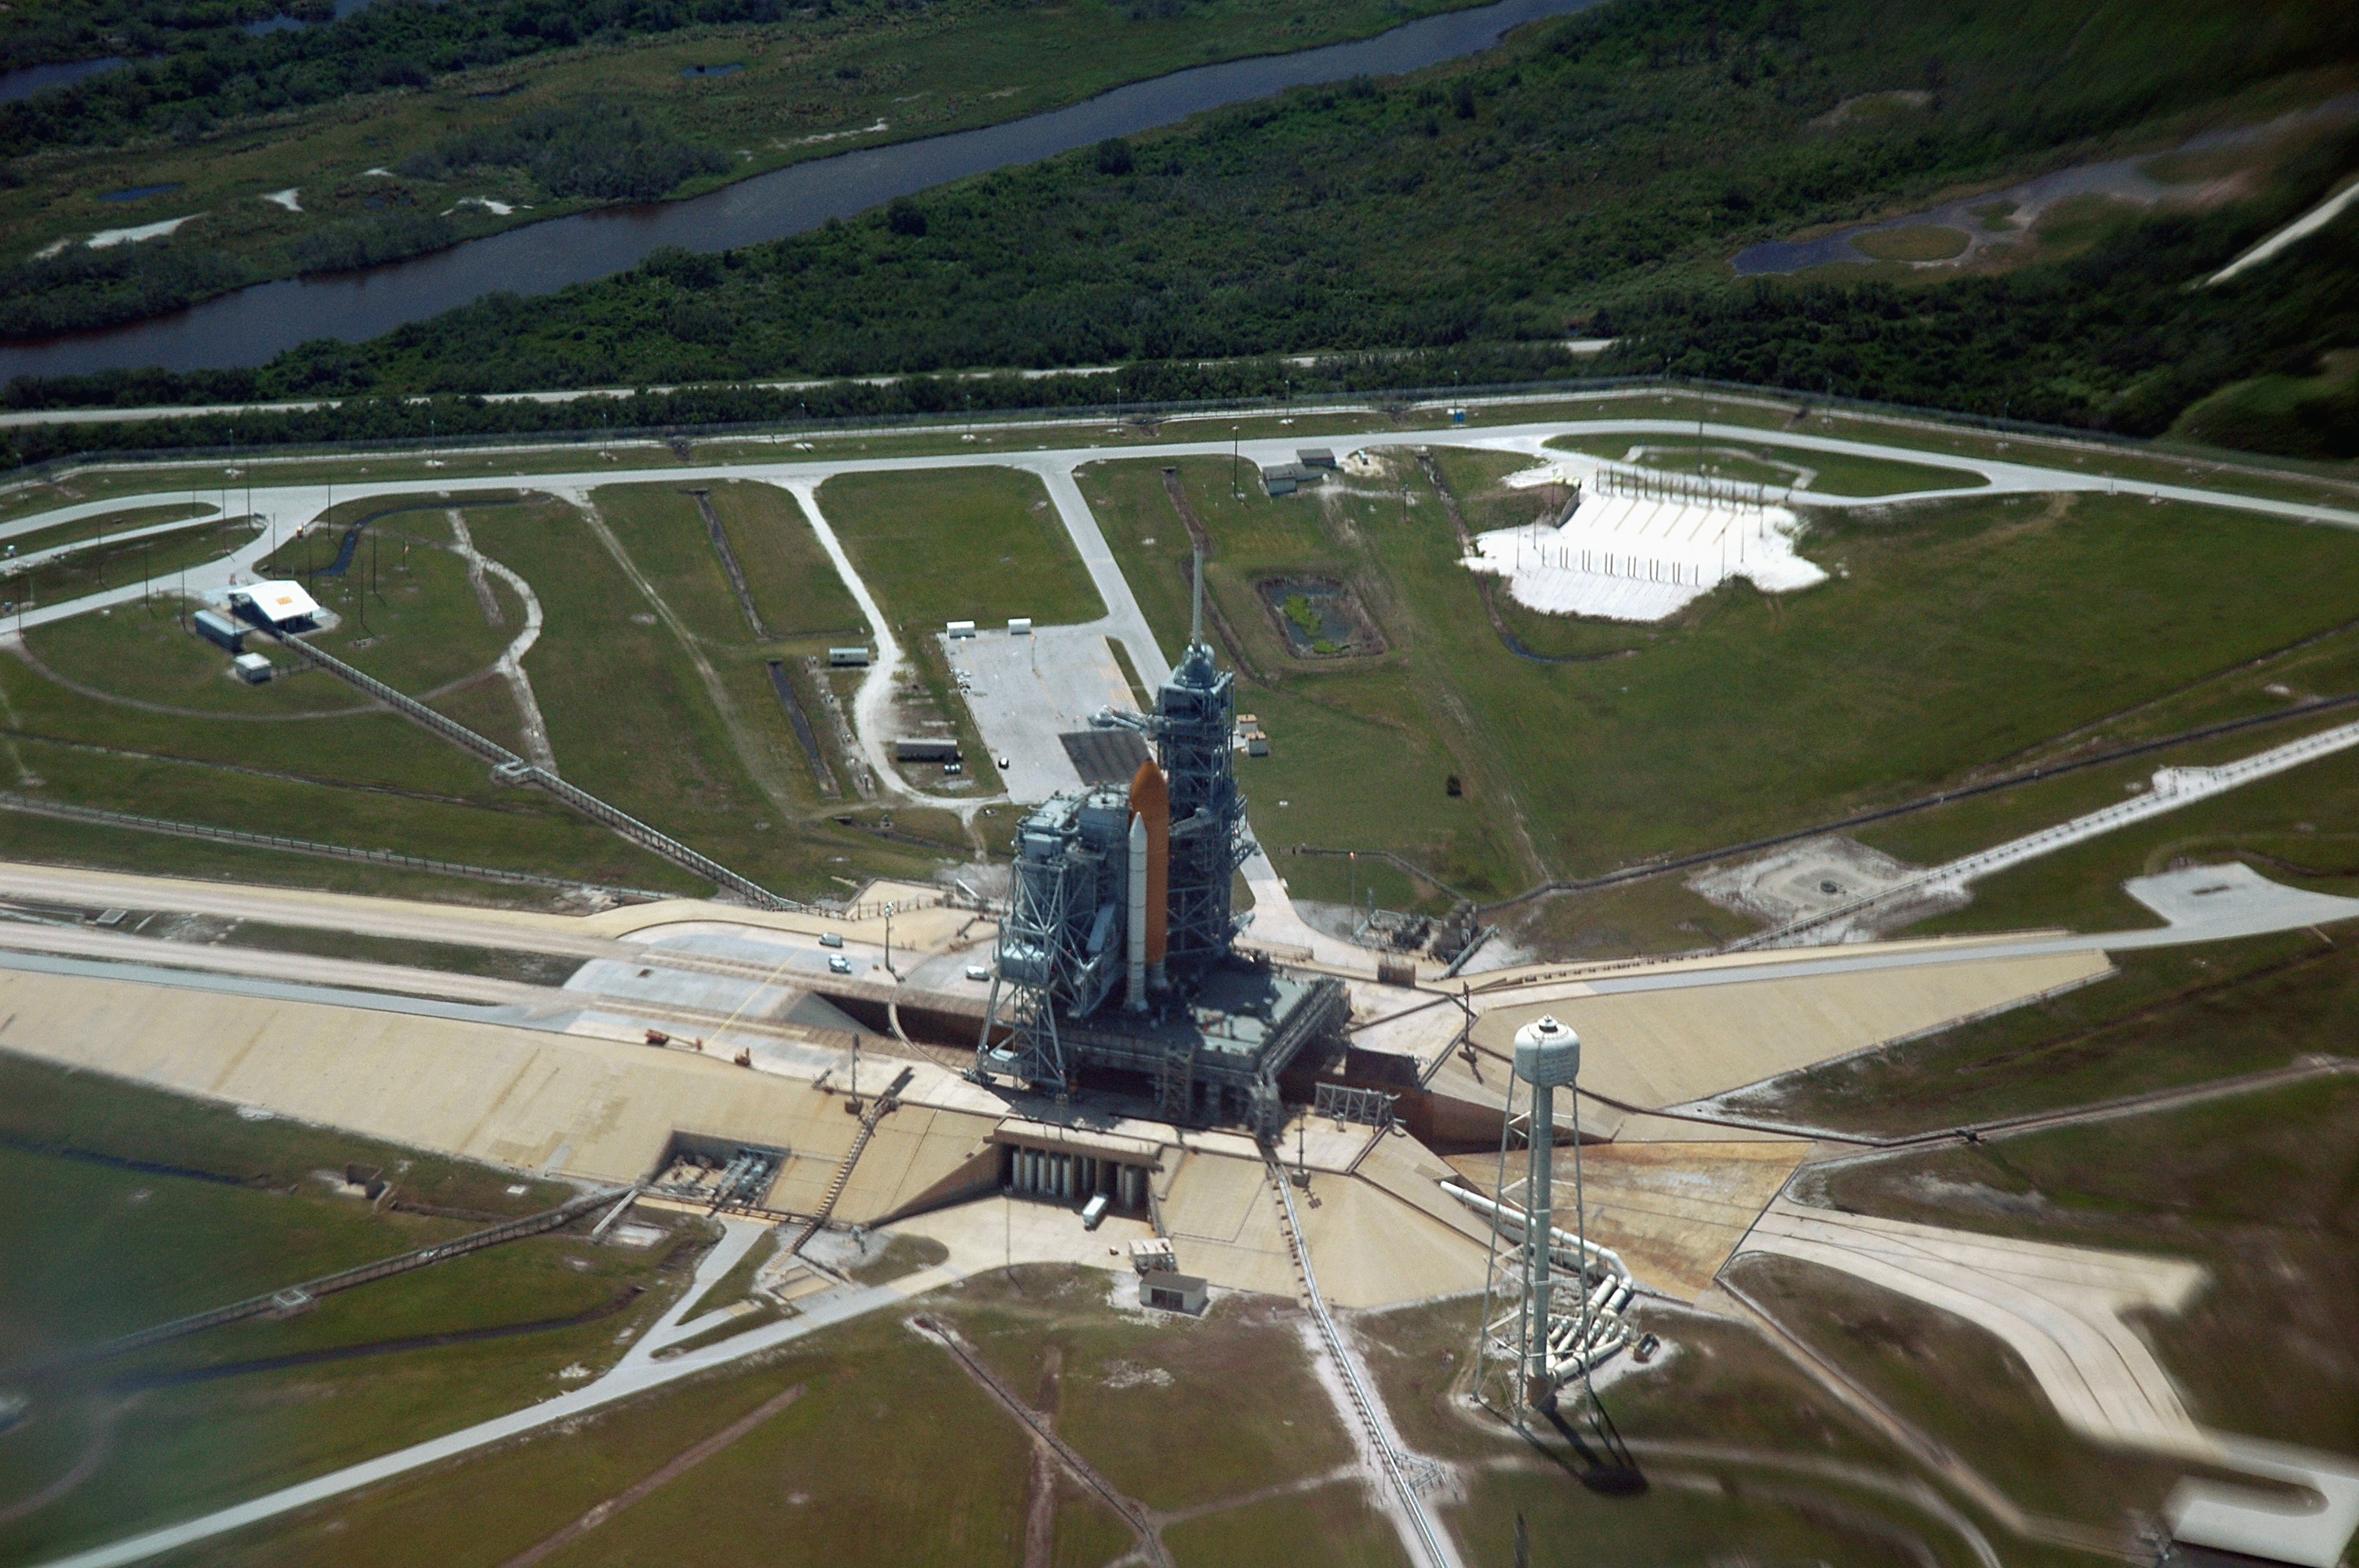 Pictured on Pad 39B in April 2005, Discovery would weather a rollback and second pad flow before finally reaching orbit on 26 July. Photo Credit: NASA